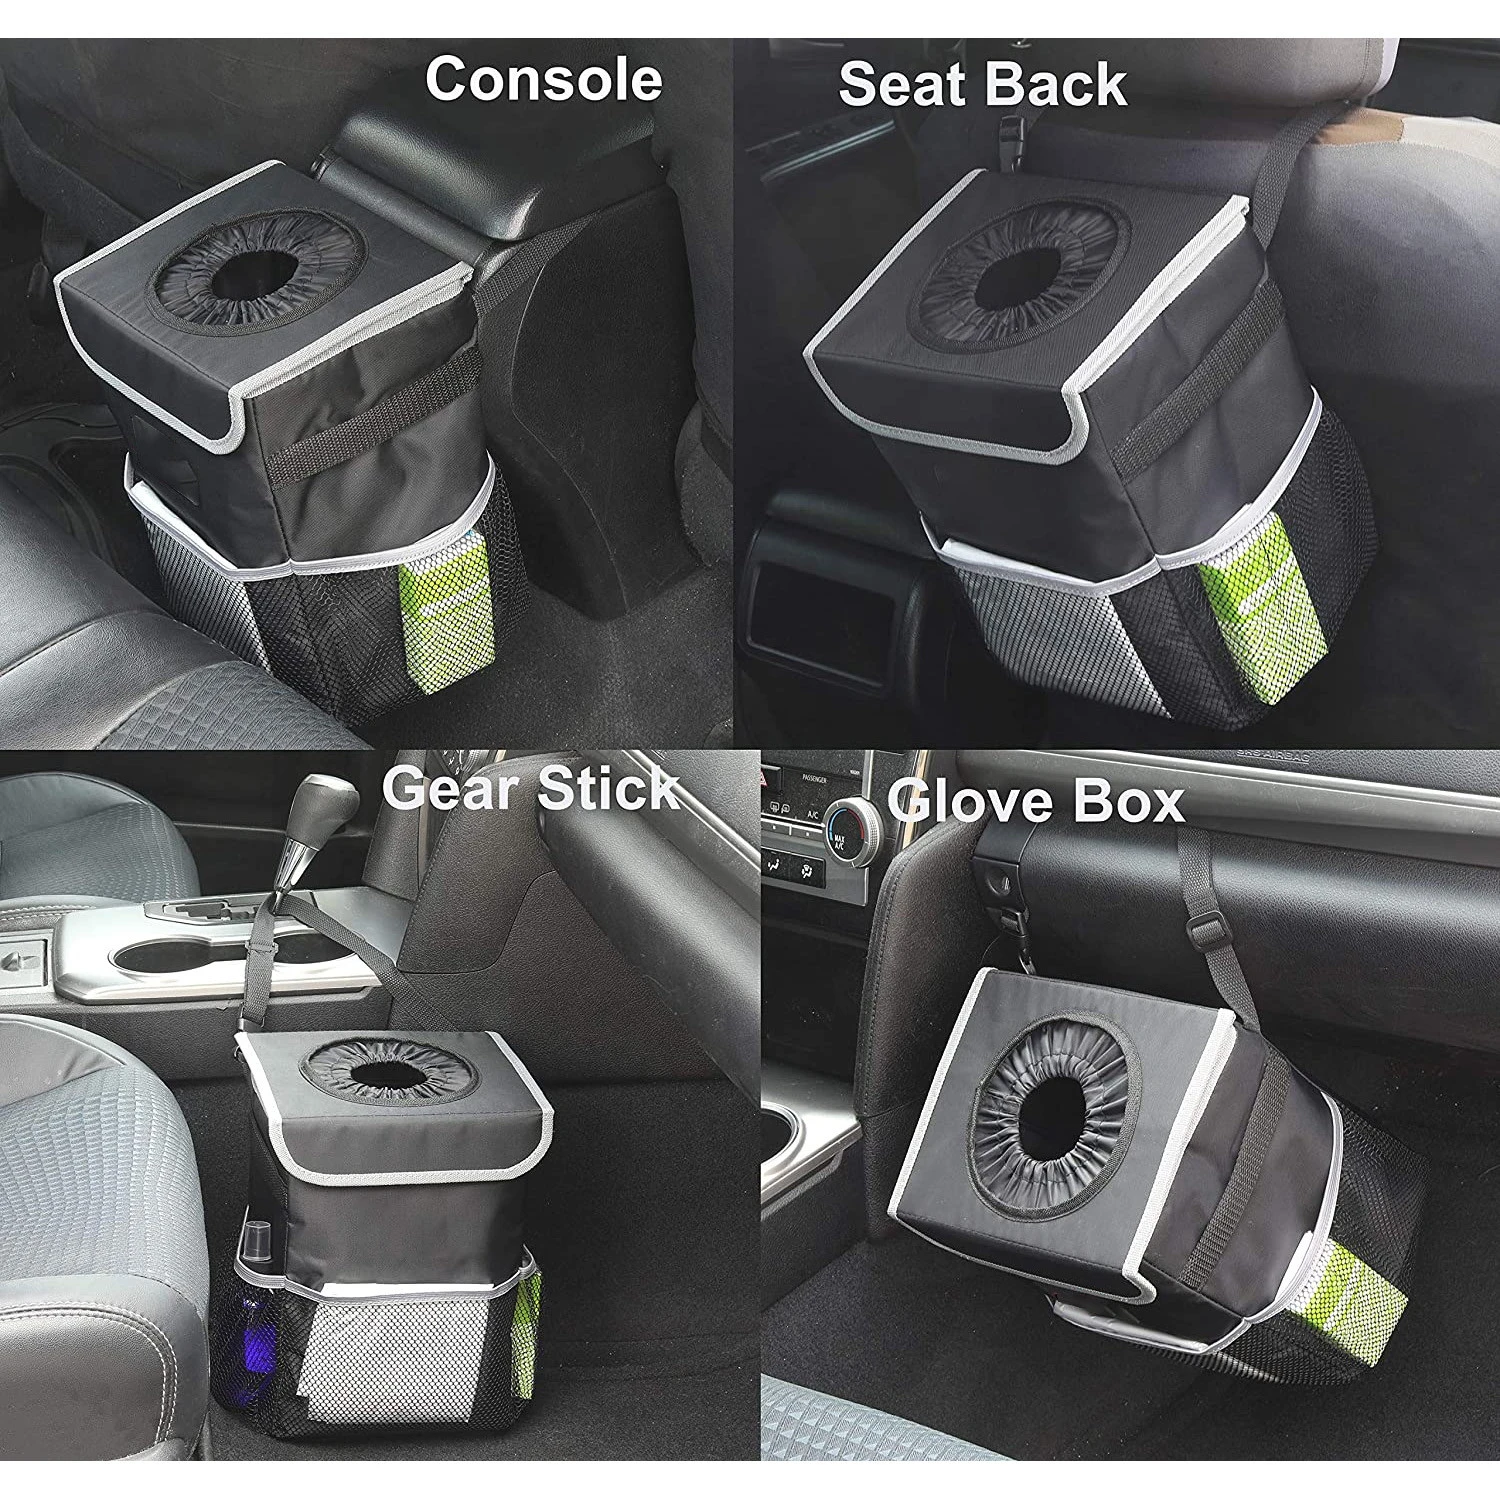 Collapsible Portable Car Garbage Bin Black Car Trash Can with Lid Car Trash Bag Hanging with Storage Pockets